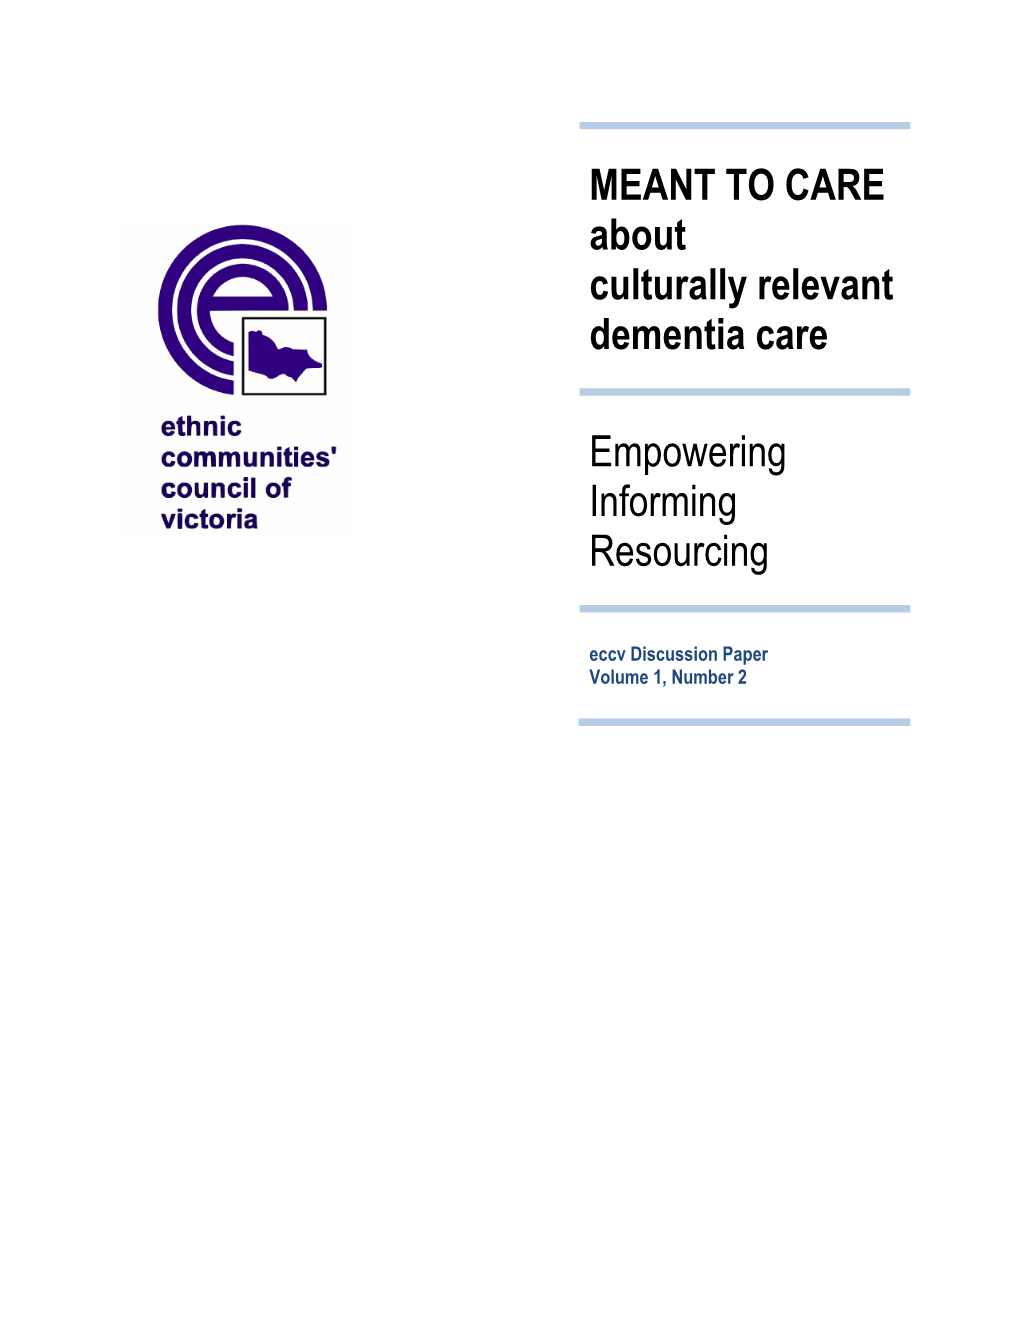 Discussion Paper: Meant to Care About Culturally Relevant Dementia